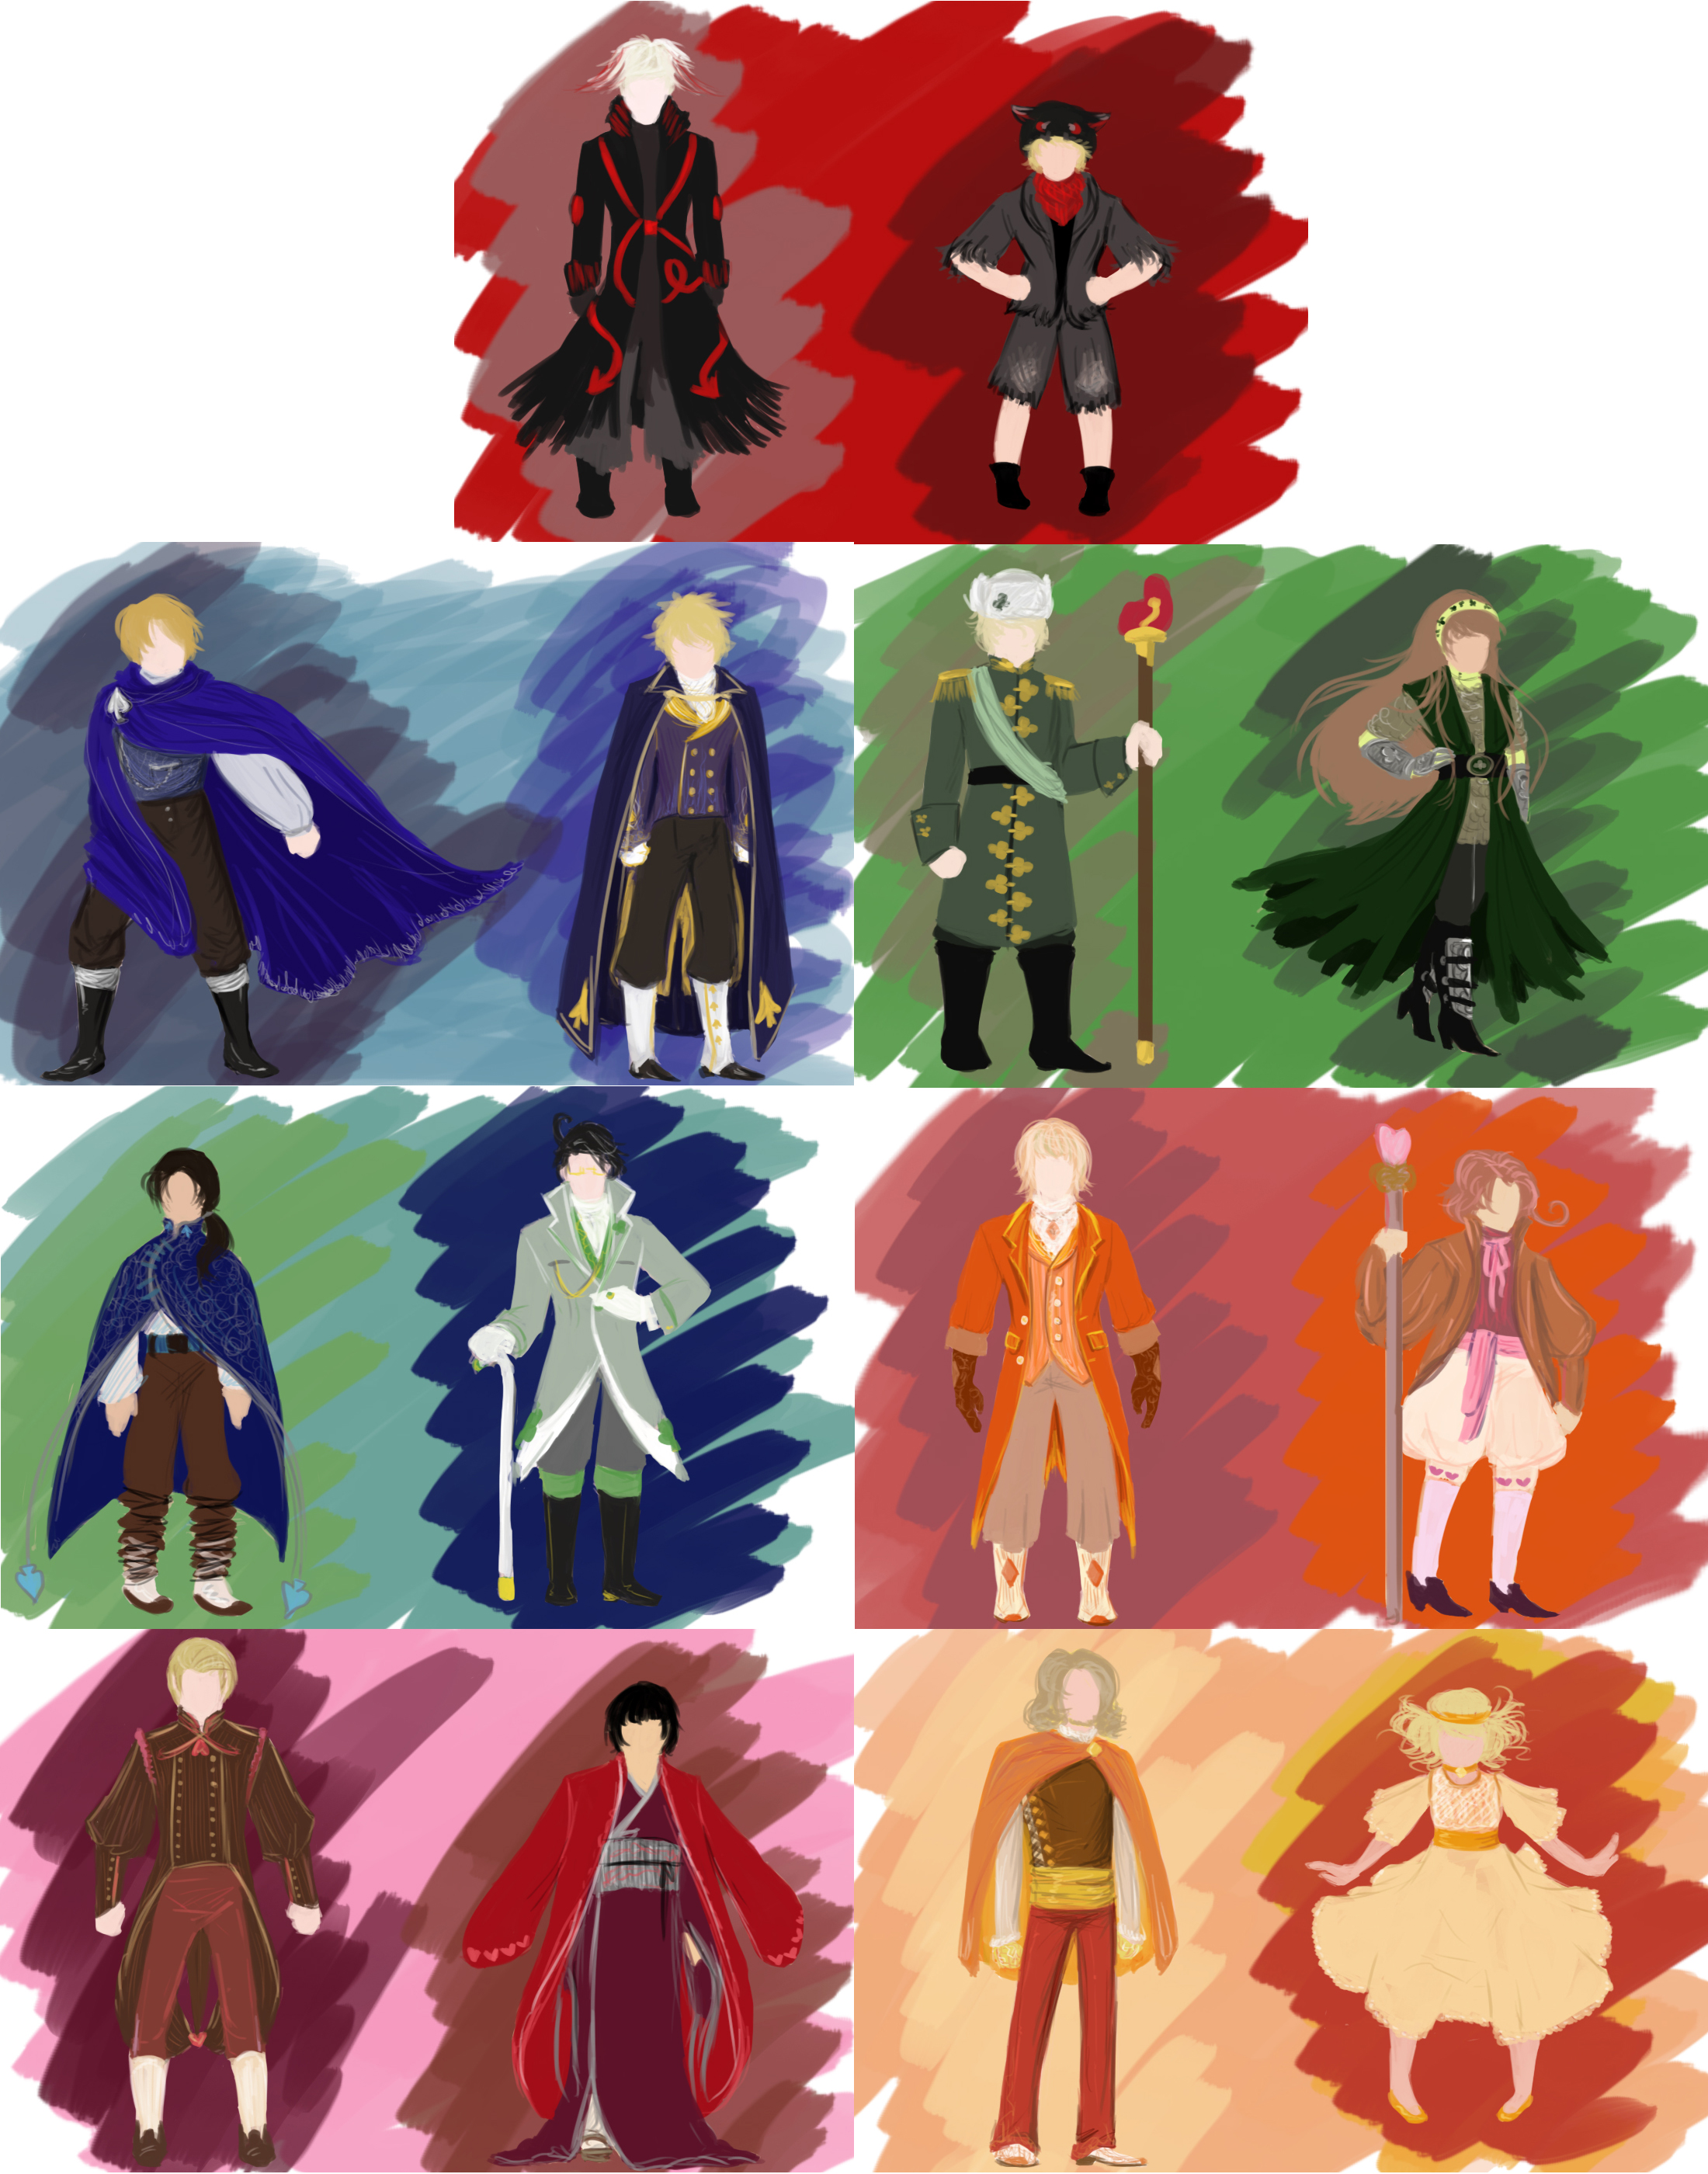 APH - Cardverse redesigns